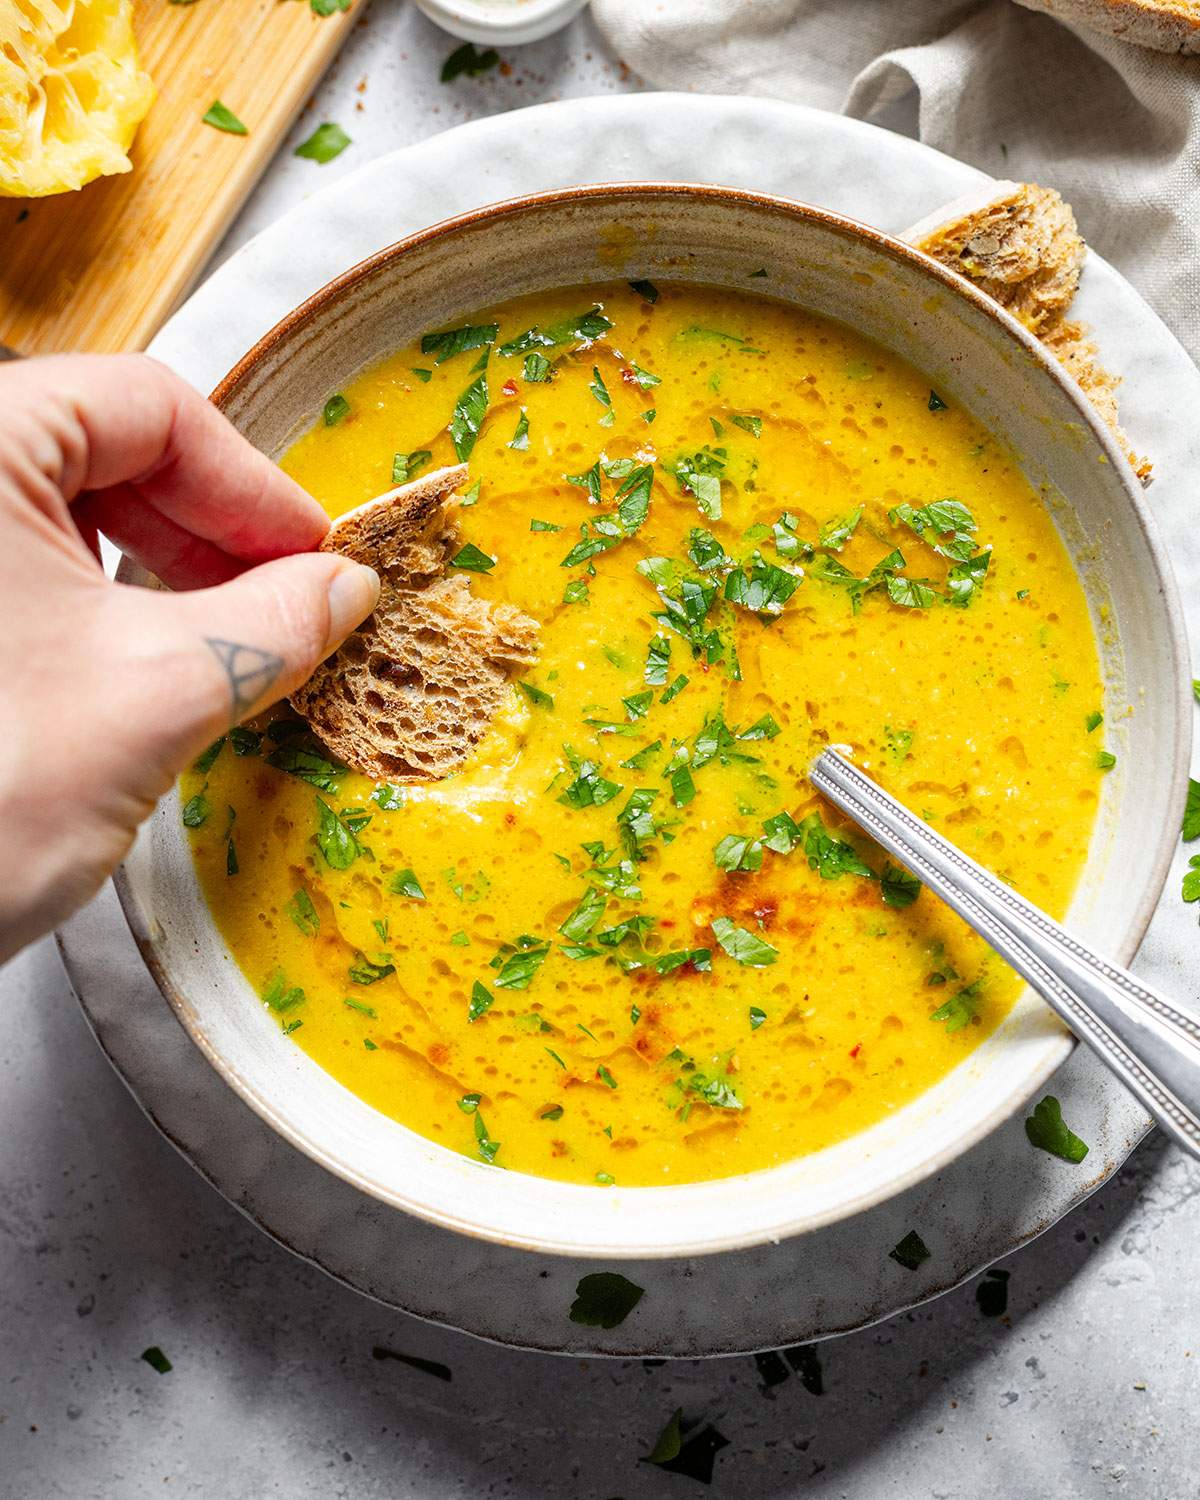 A vibrant bowl of lemon soup and a piece of bread dipped into it.